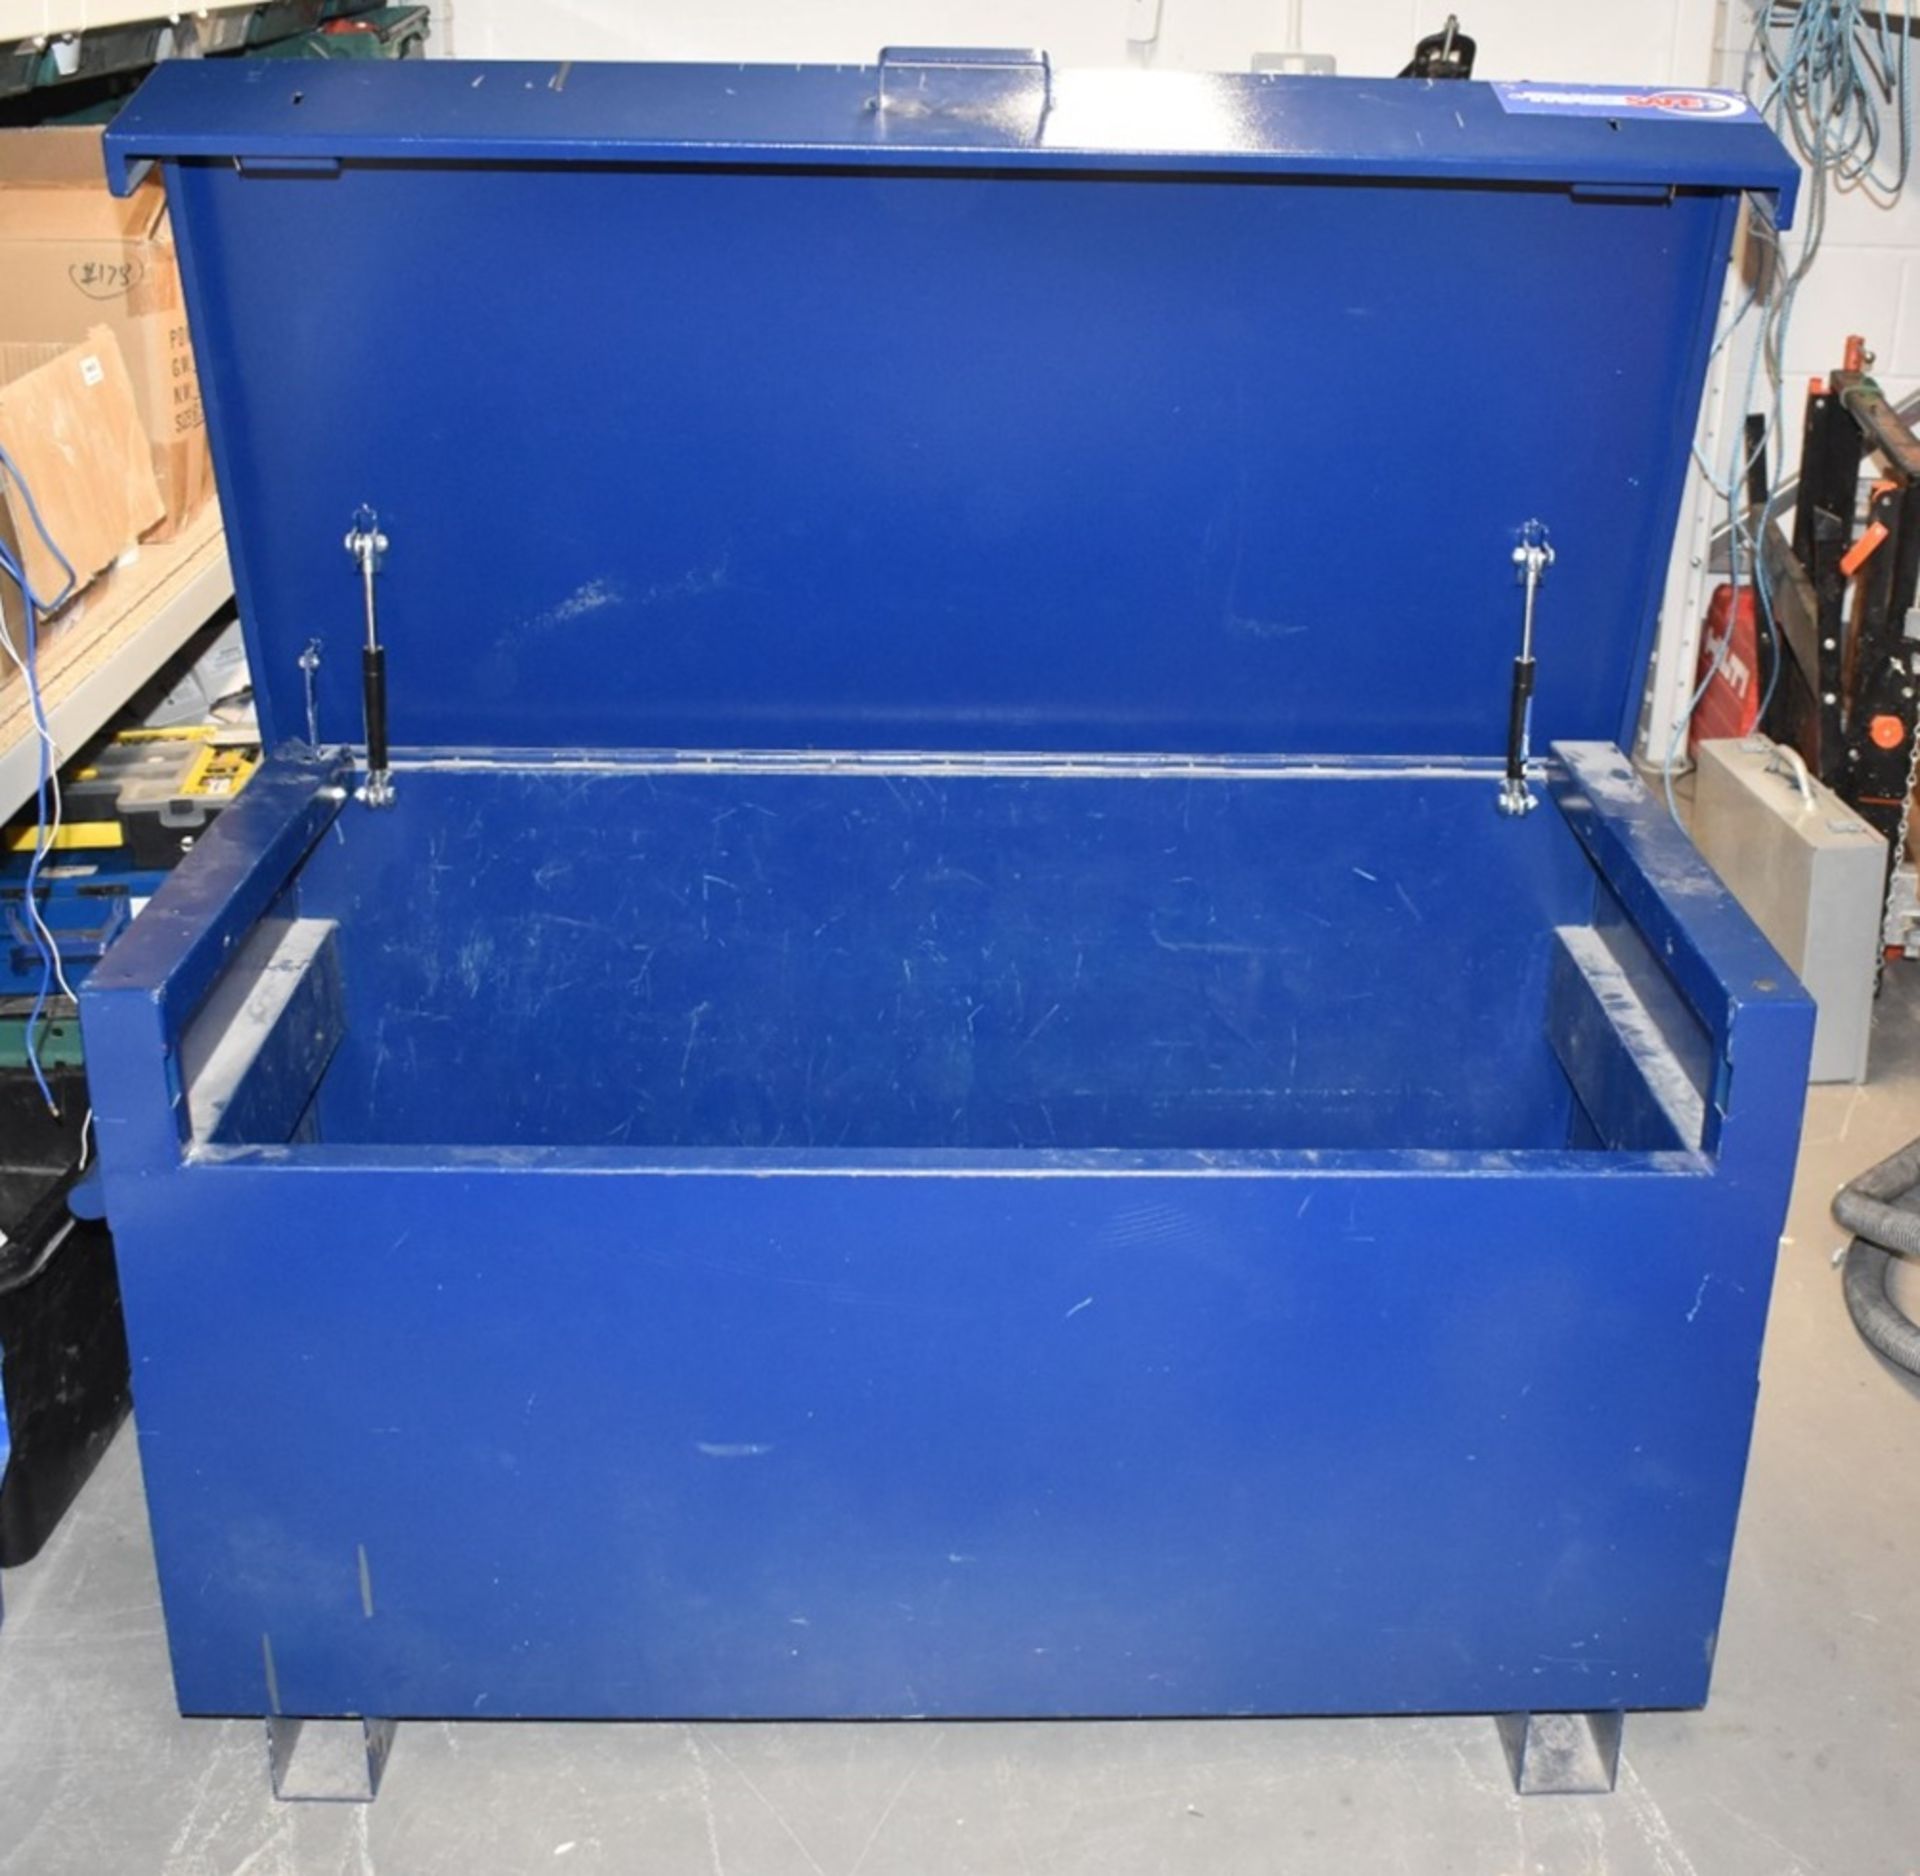 1 x TradeSafe Tool Storage Chest - Ideal For Use on Worksites and Vans To Help Protect Your - Image 2 of 4